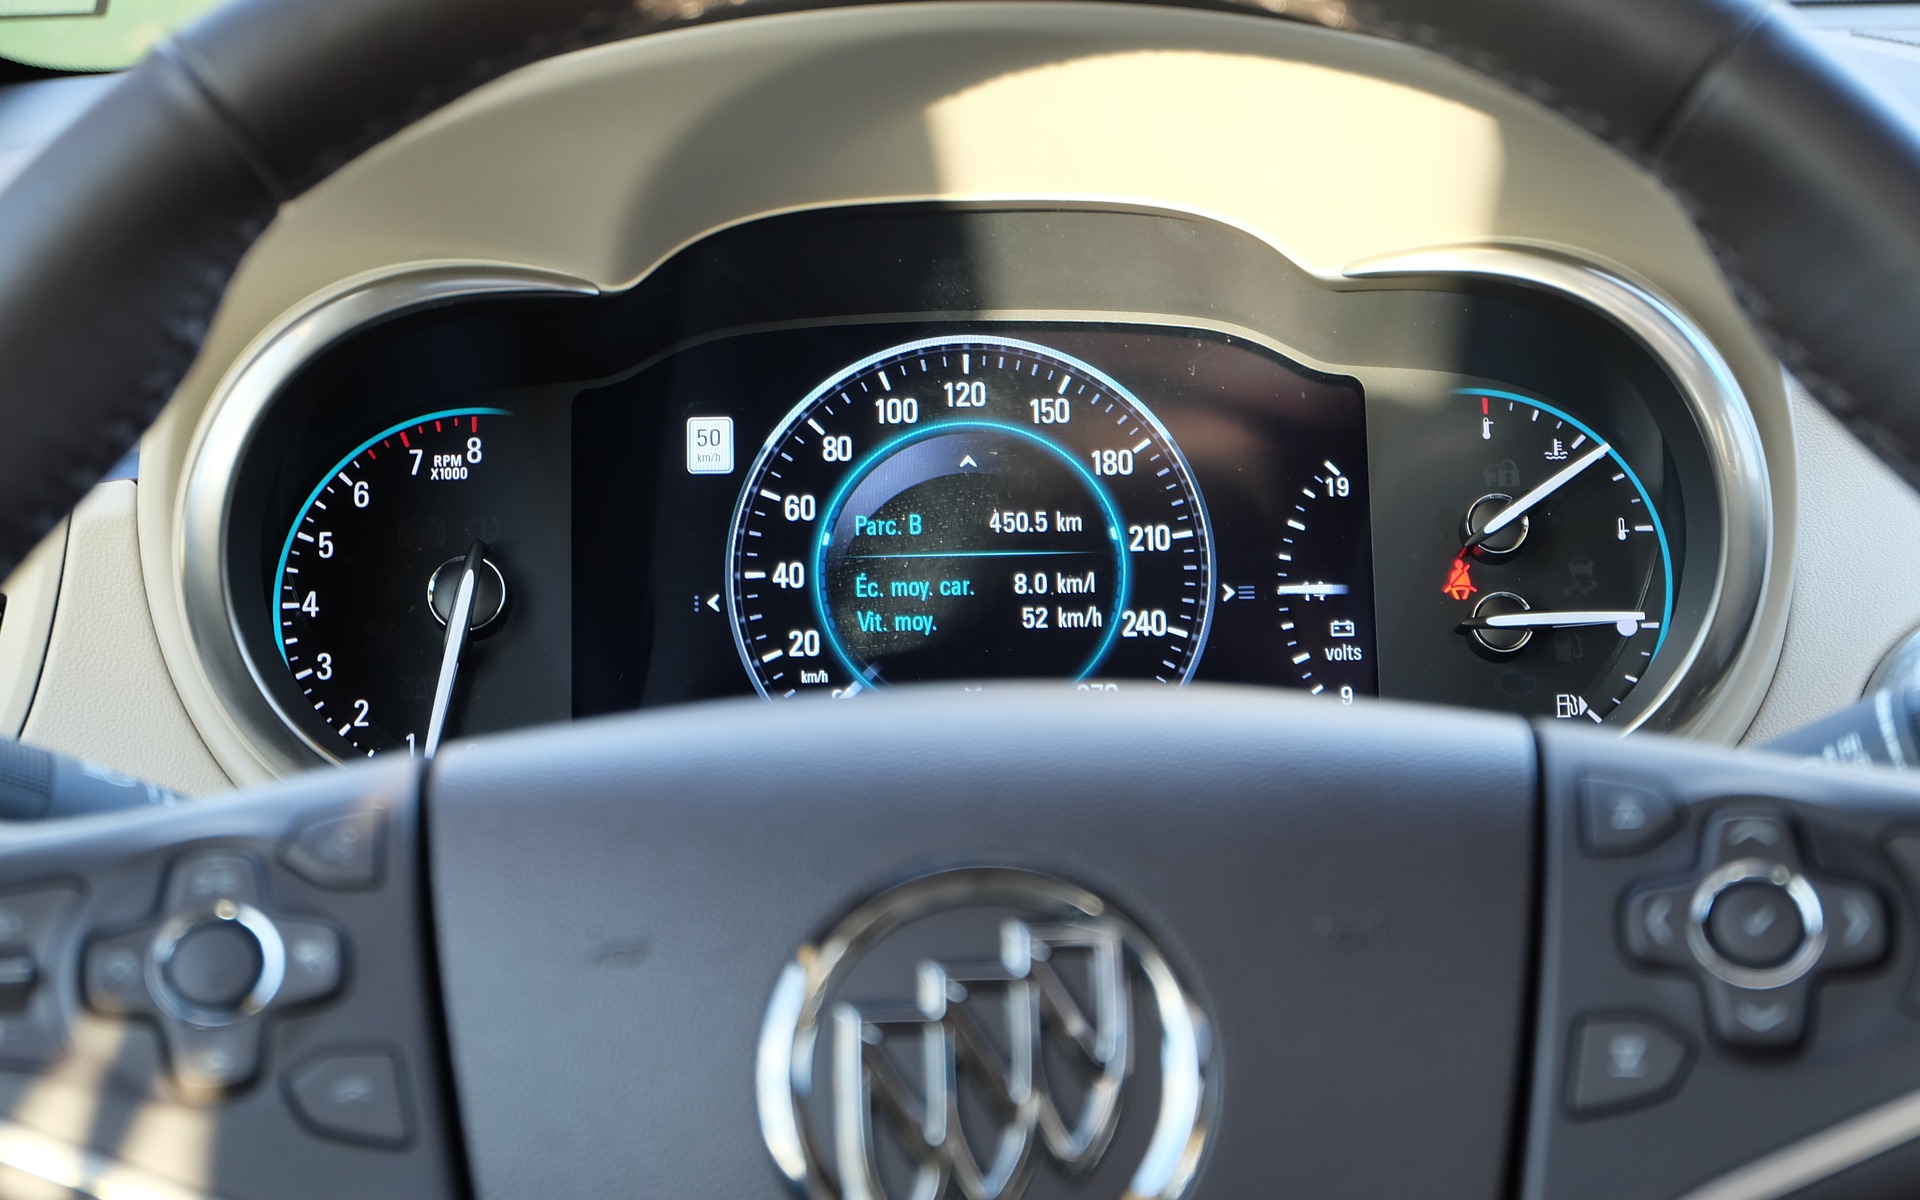 As in many GM products, the centre screen is completely configurable.